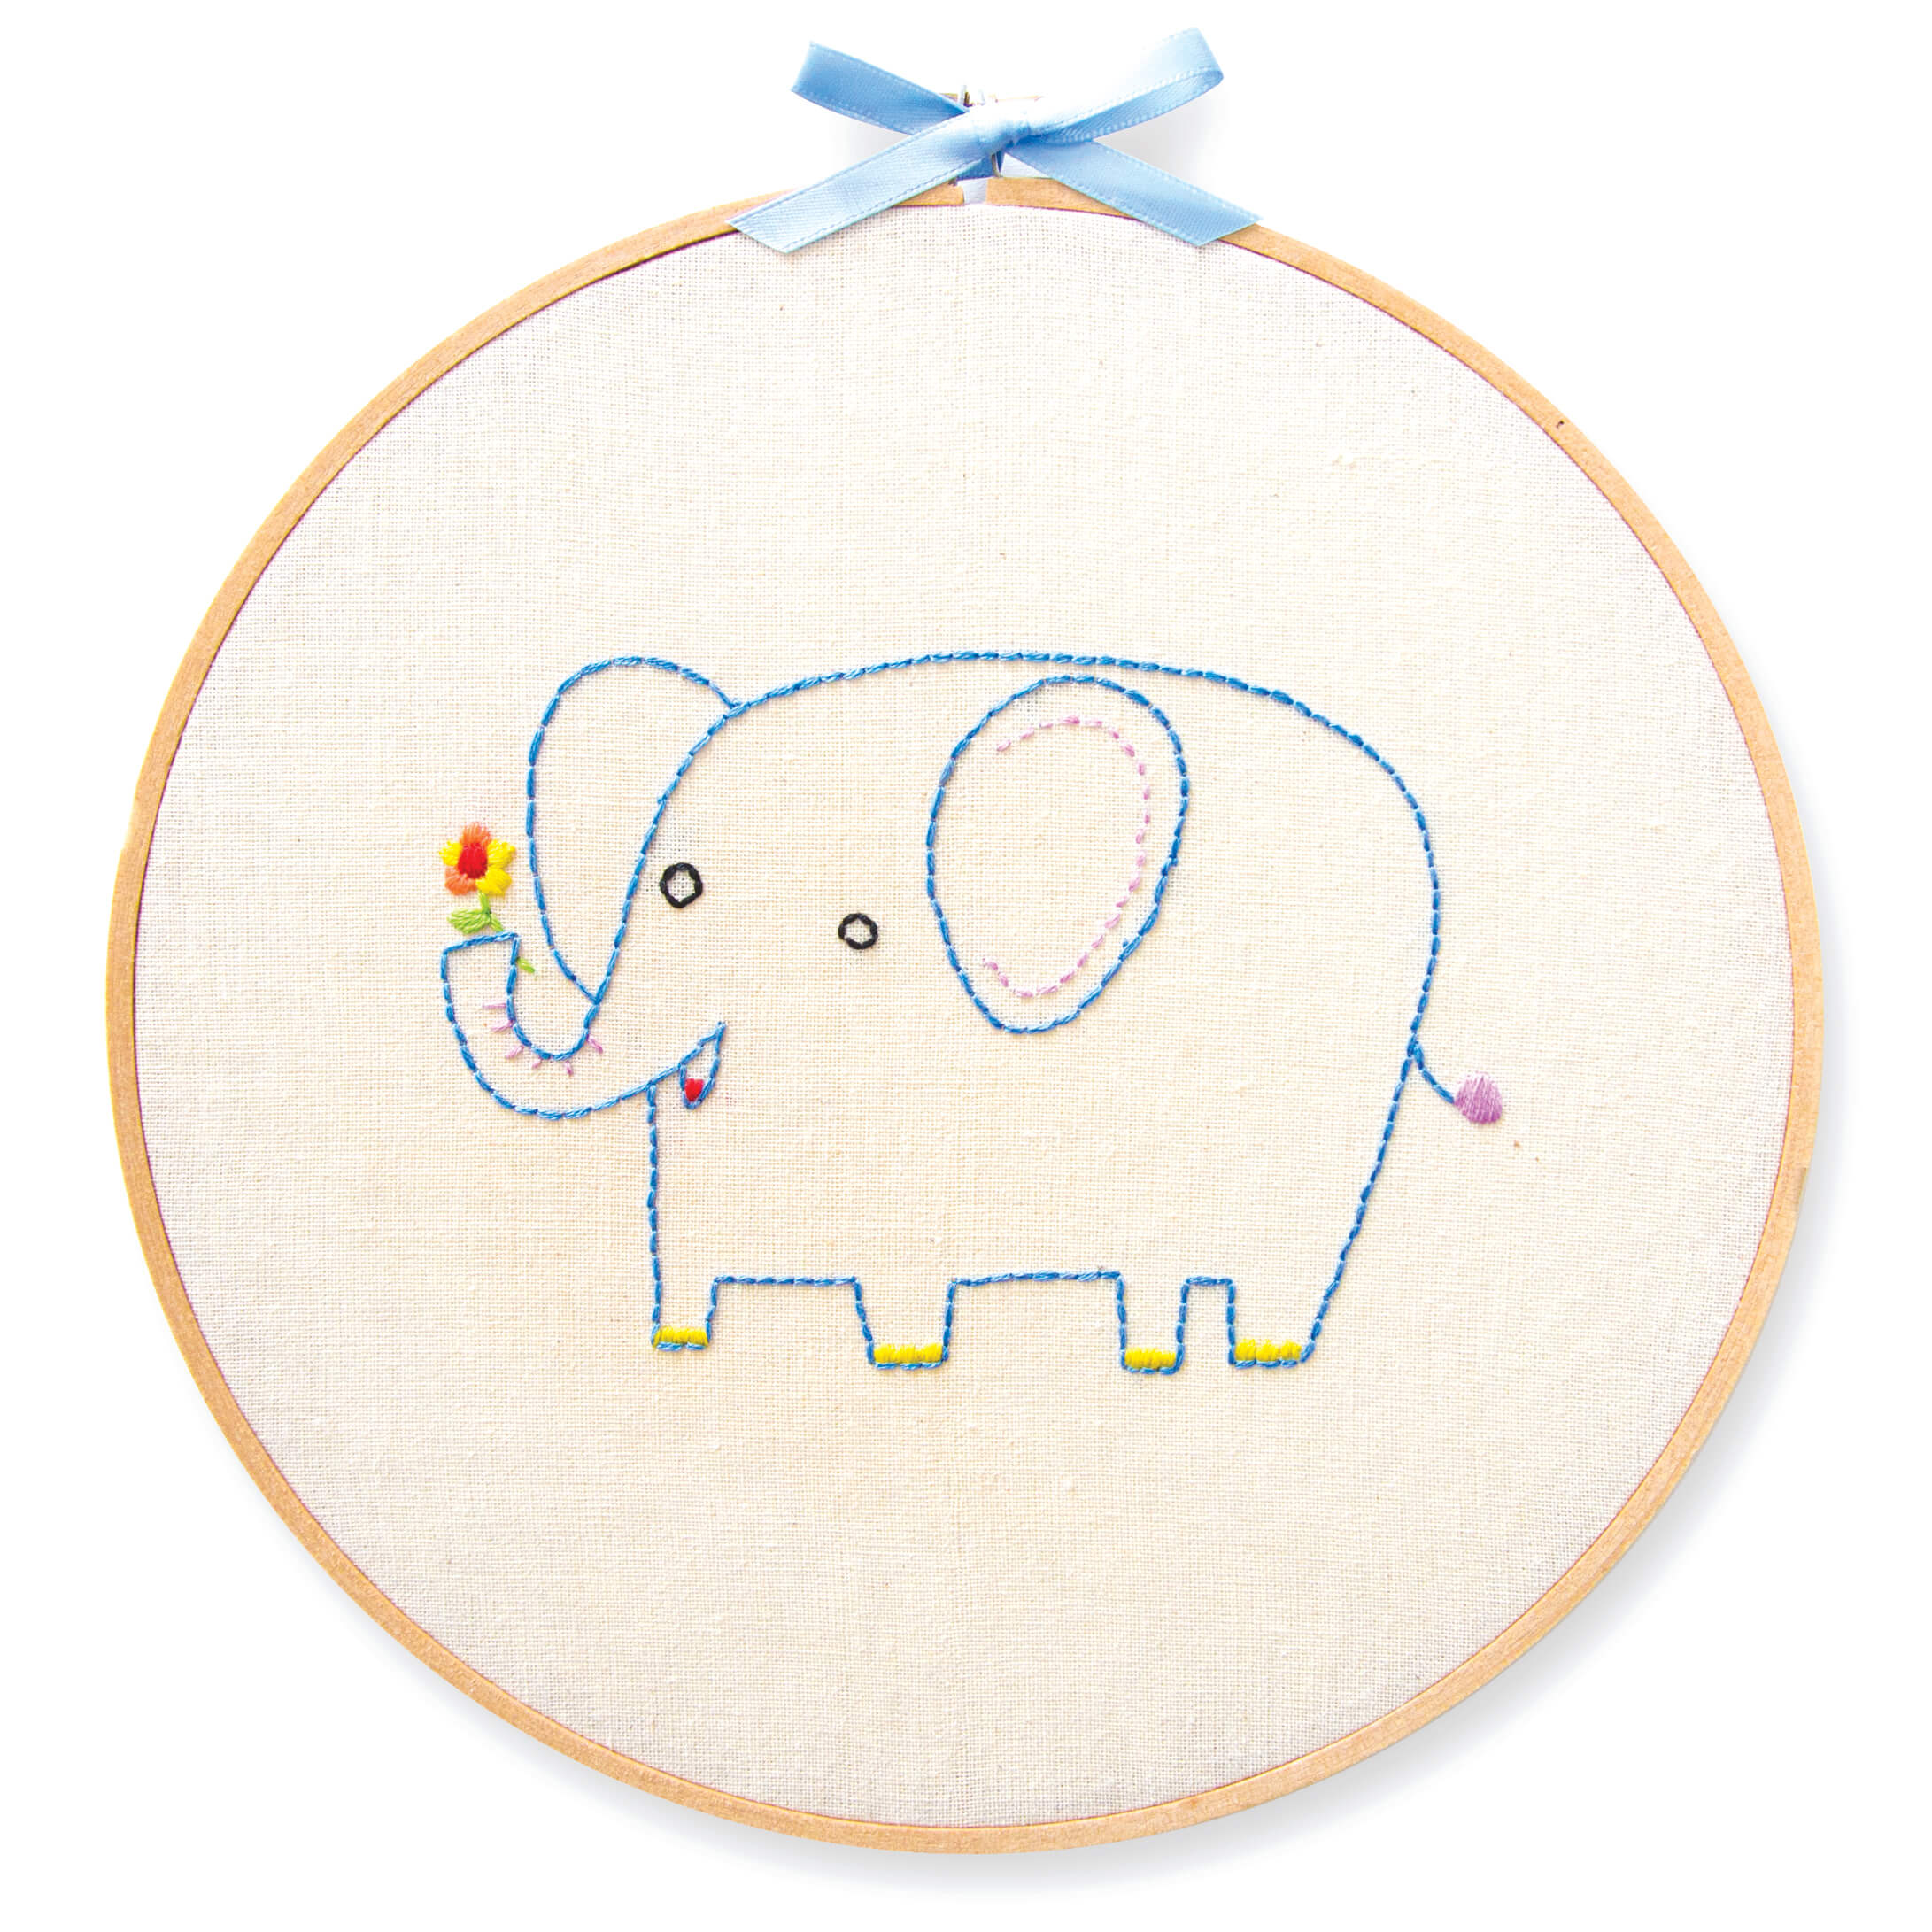 Elephant embroidery kit shown in an 8-inch hoop